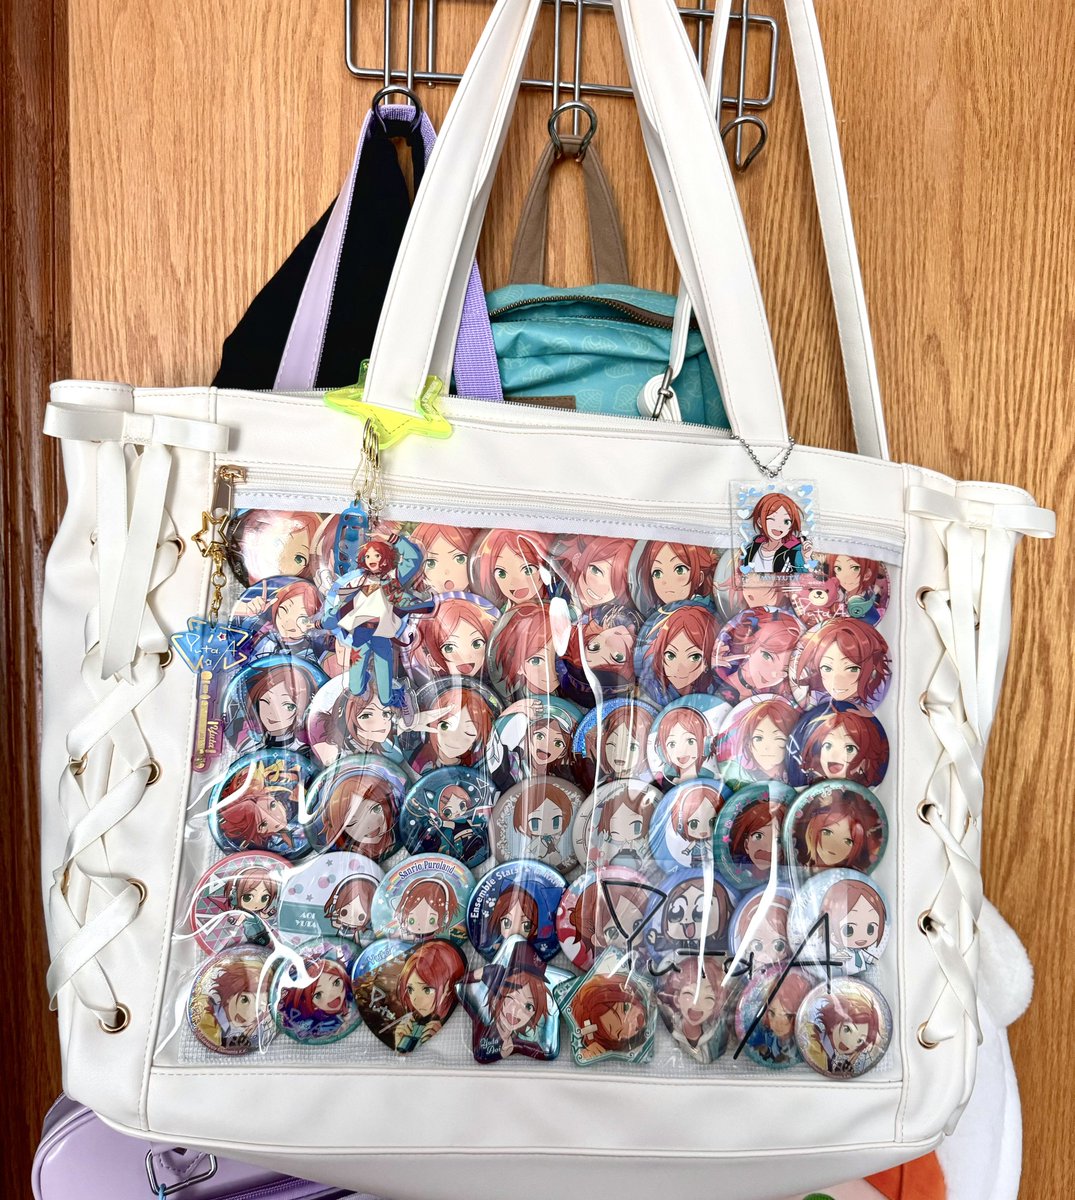 first vs most recent itabag 💙

from one blue idol to another